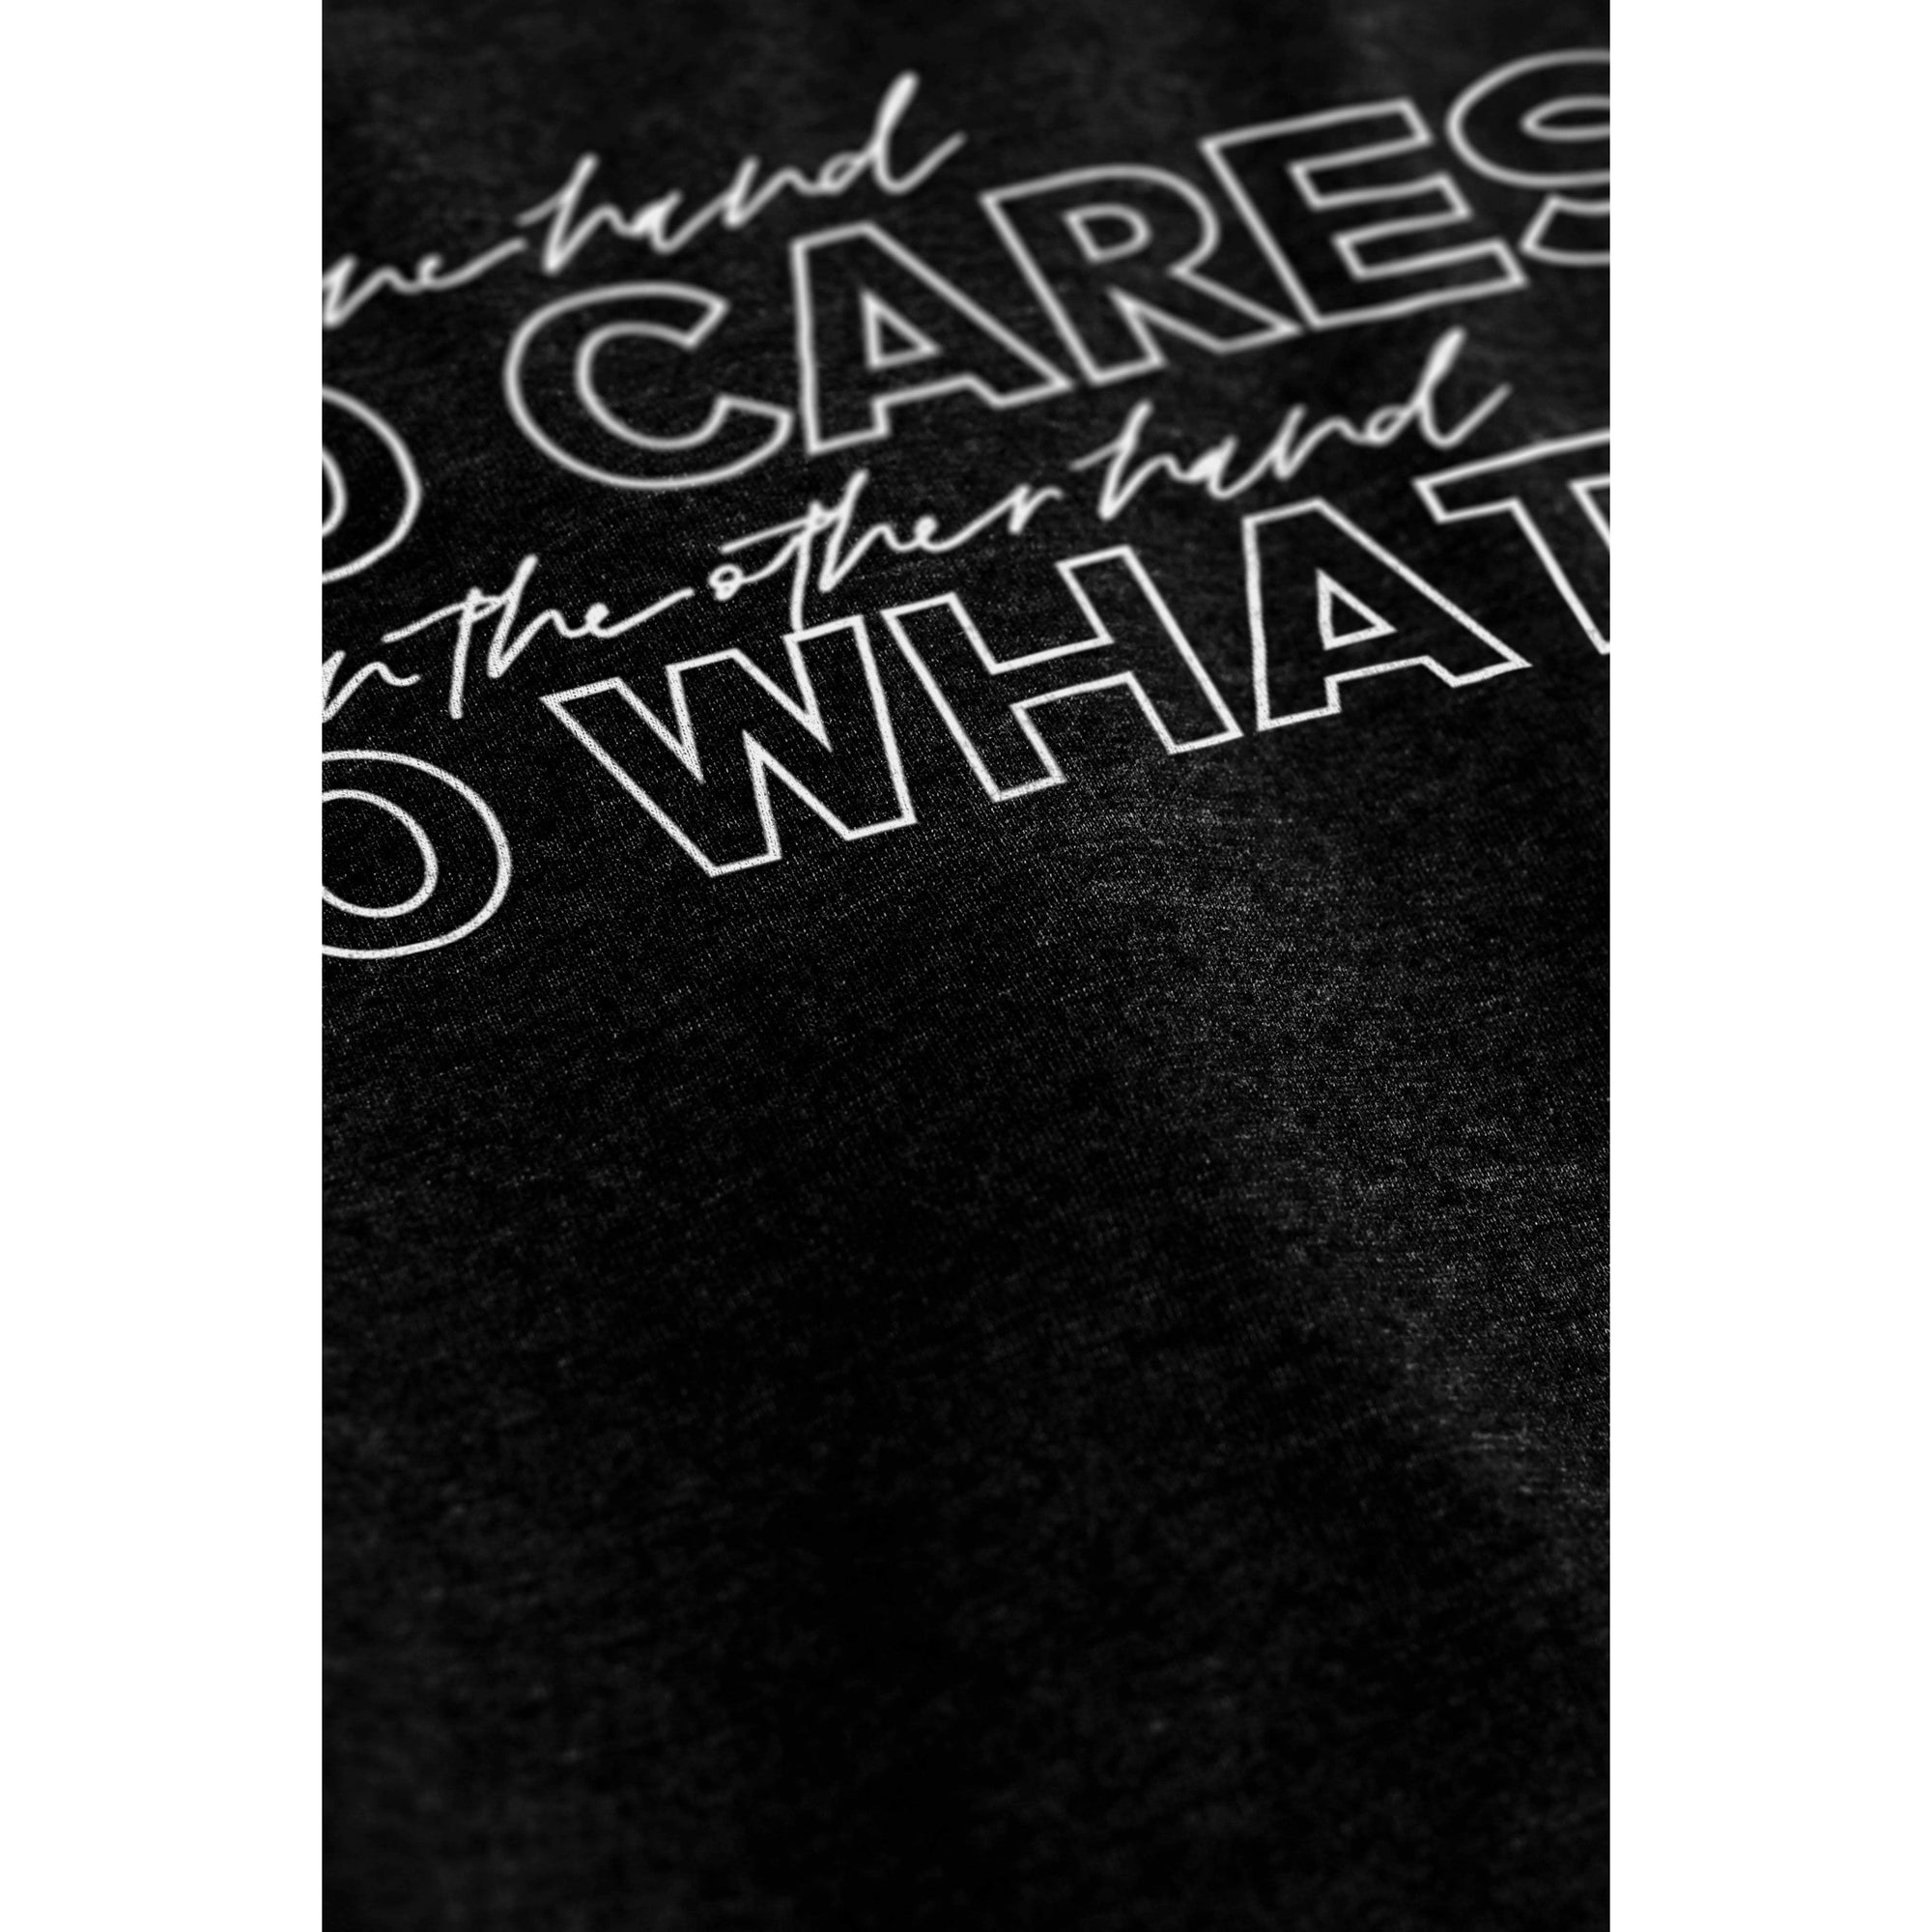 Who Cares? So What?